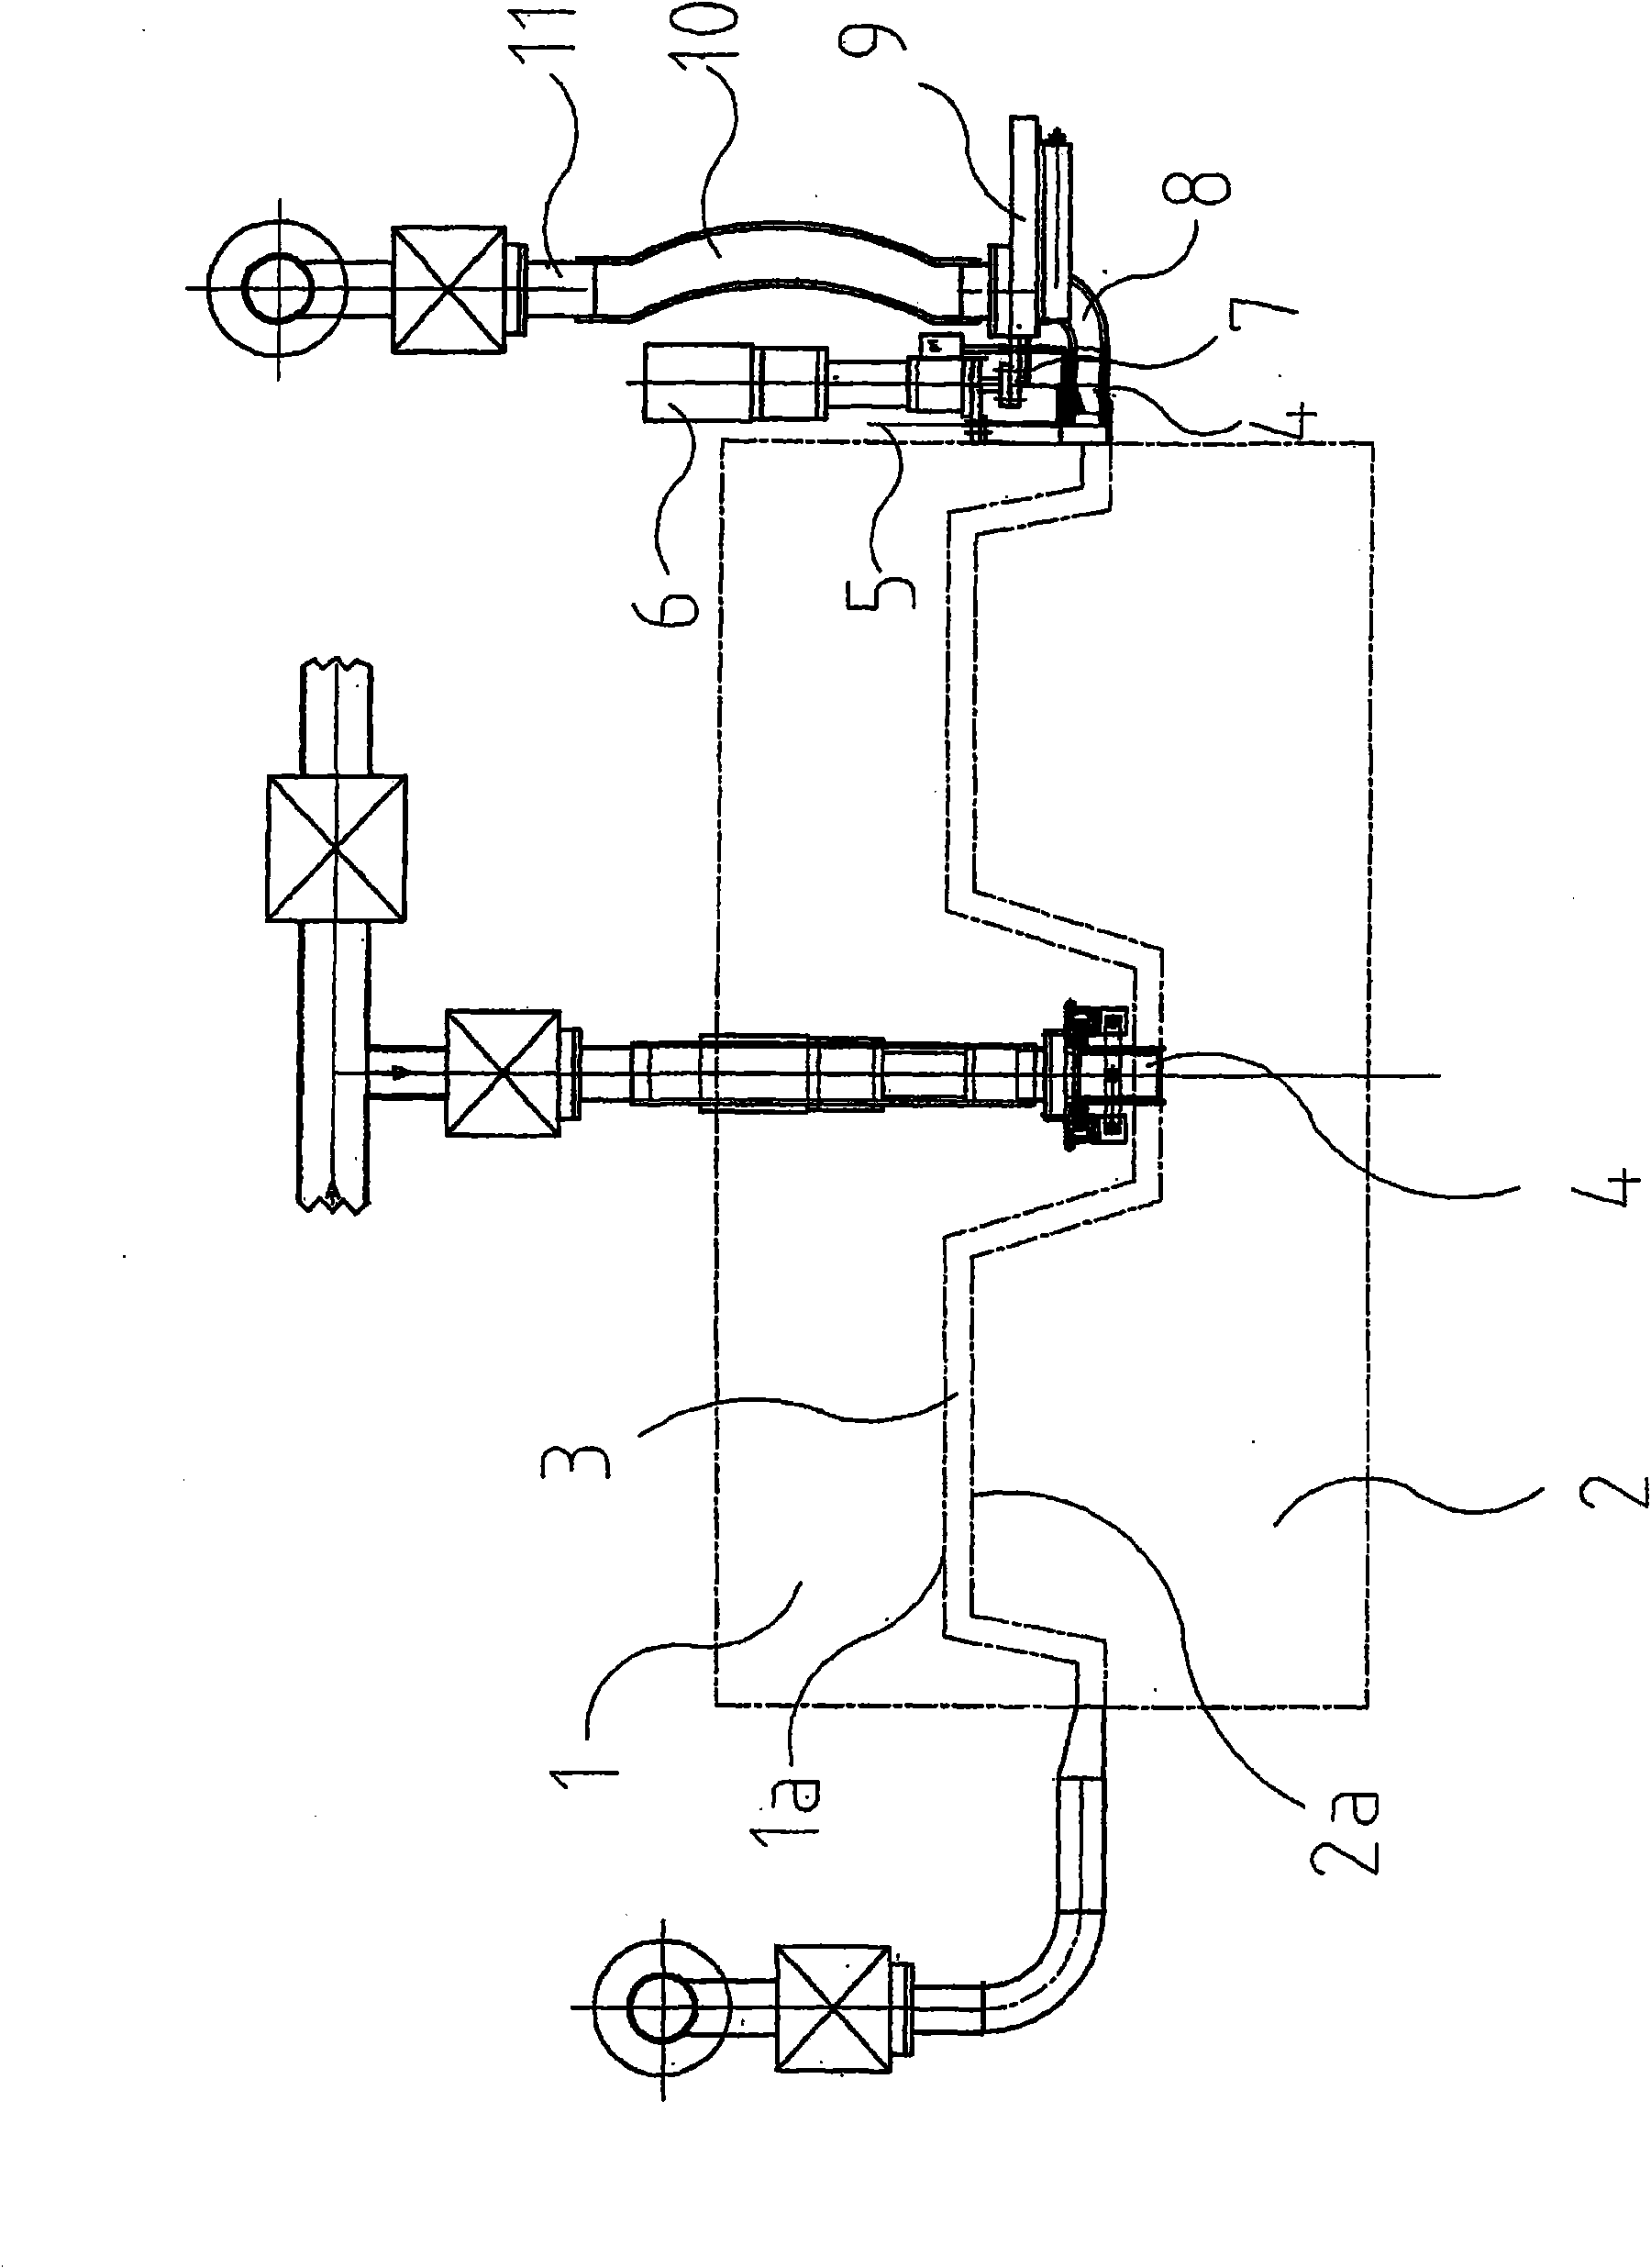 Device for producing moulded pieces from fibrous material